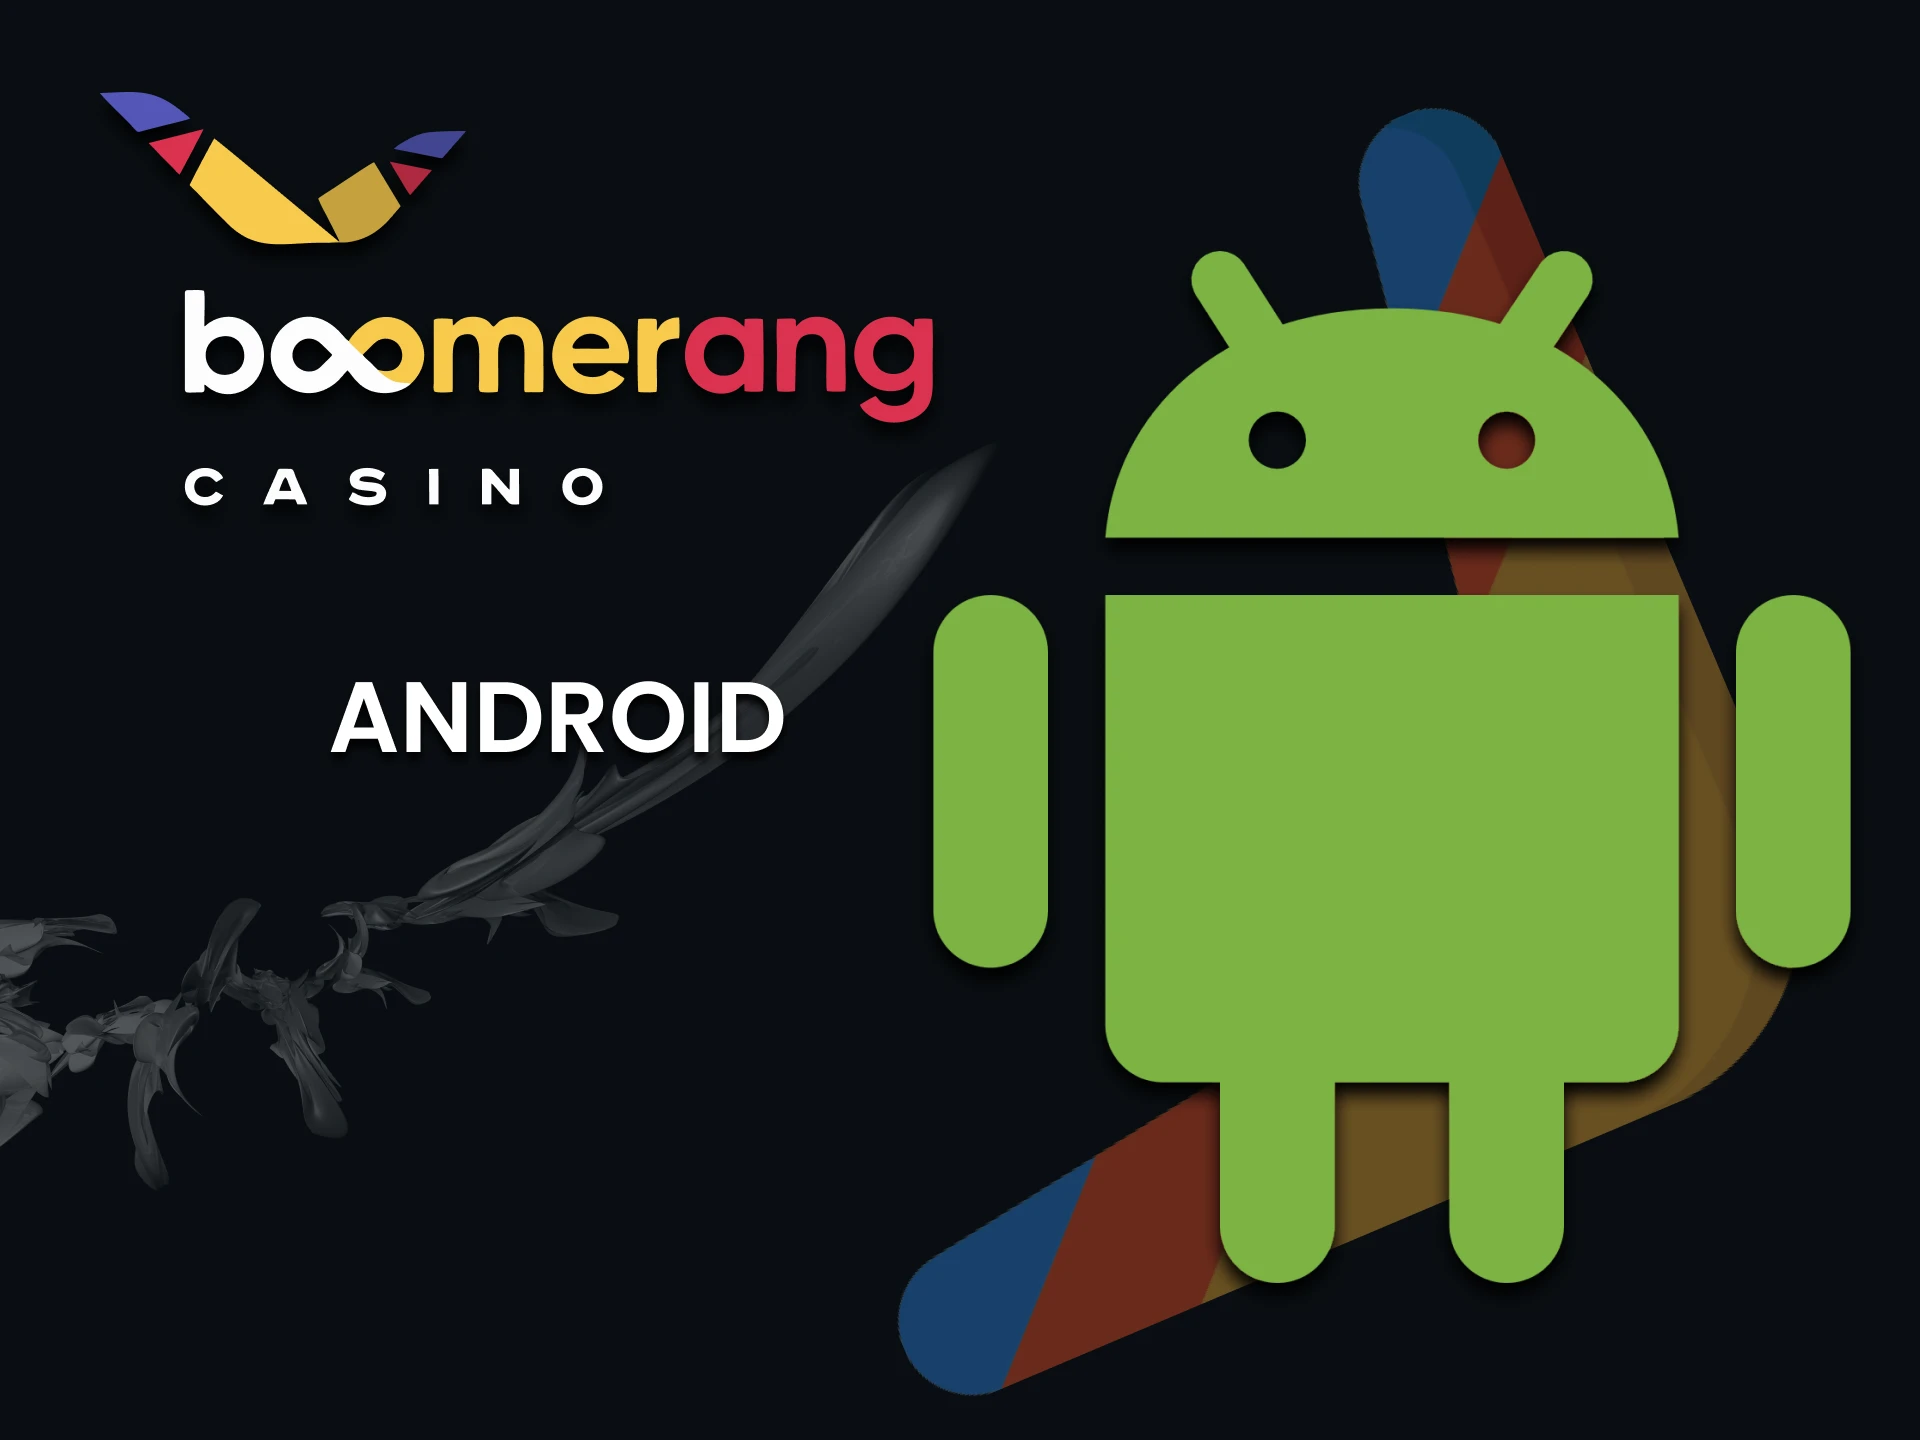 Use the Bommerang Casino app for Android.